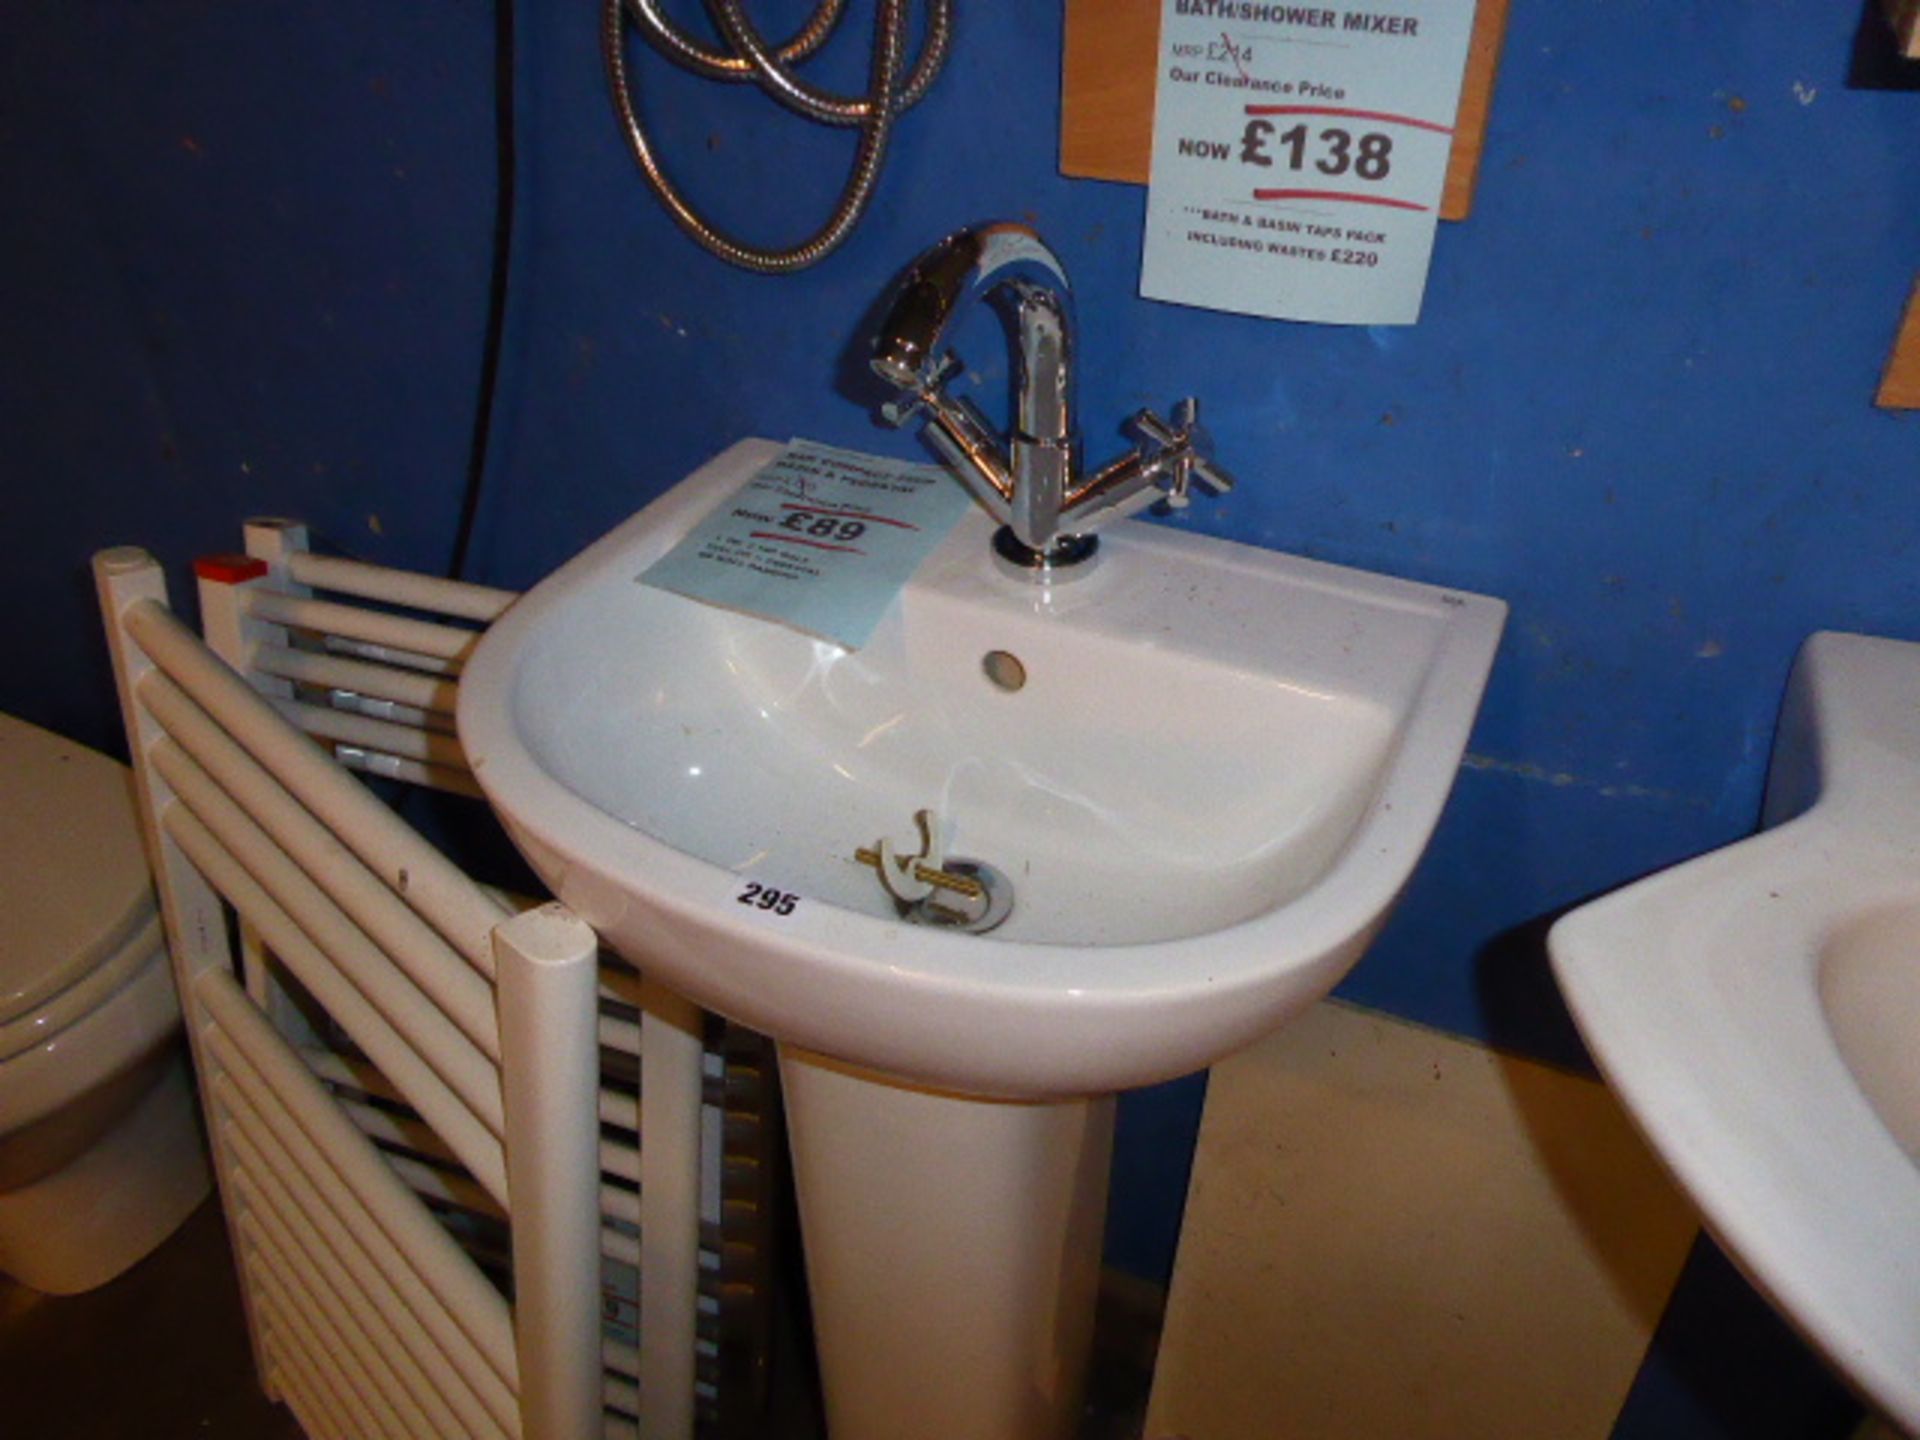 A RAK compact white ceramic wash basin and pedestal with single hole mixer tap